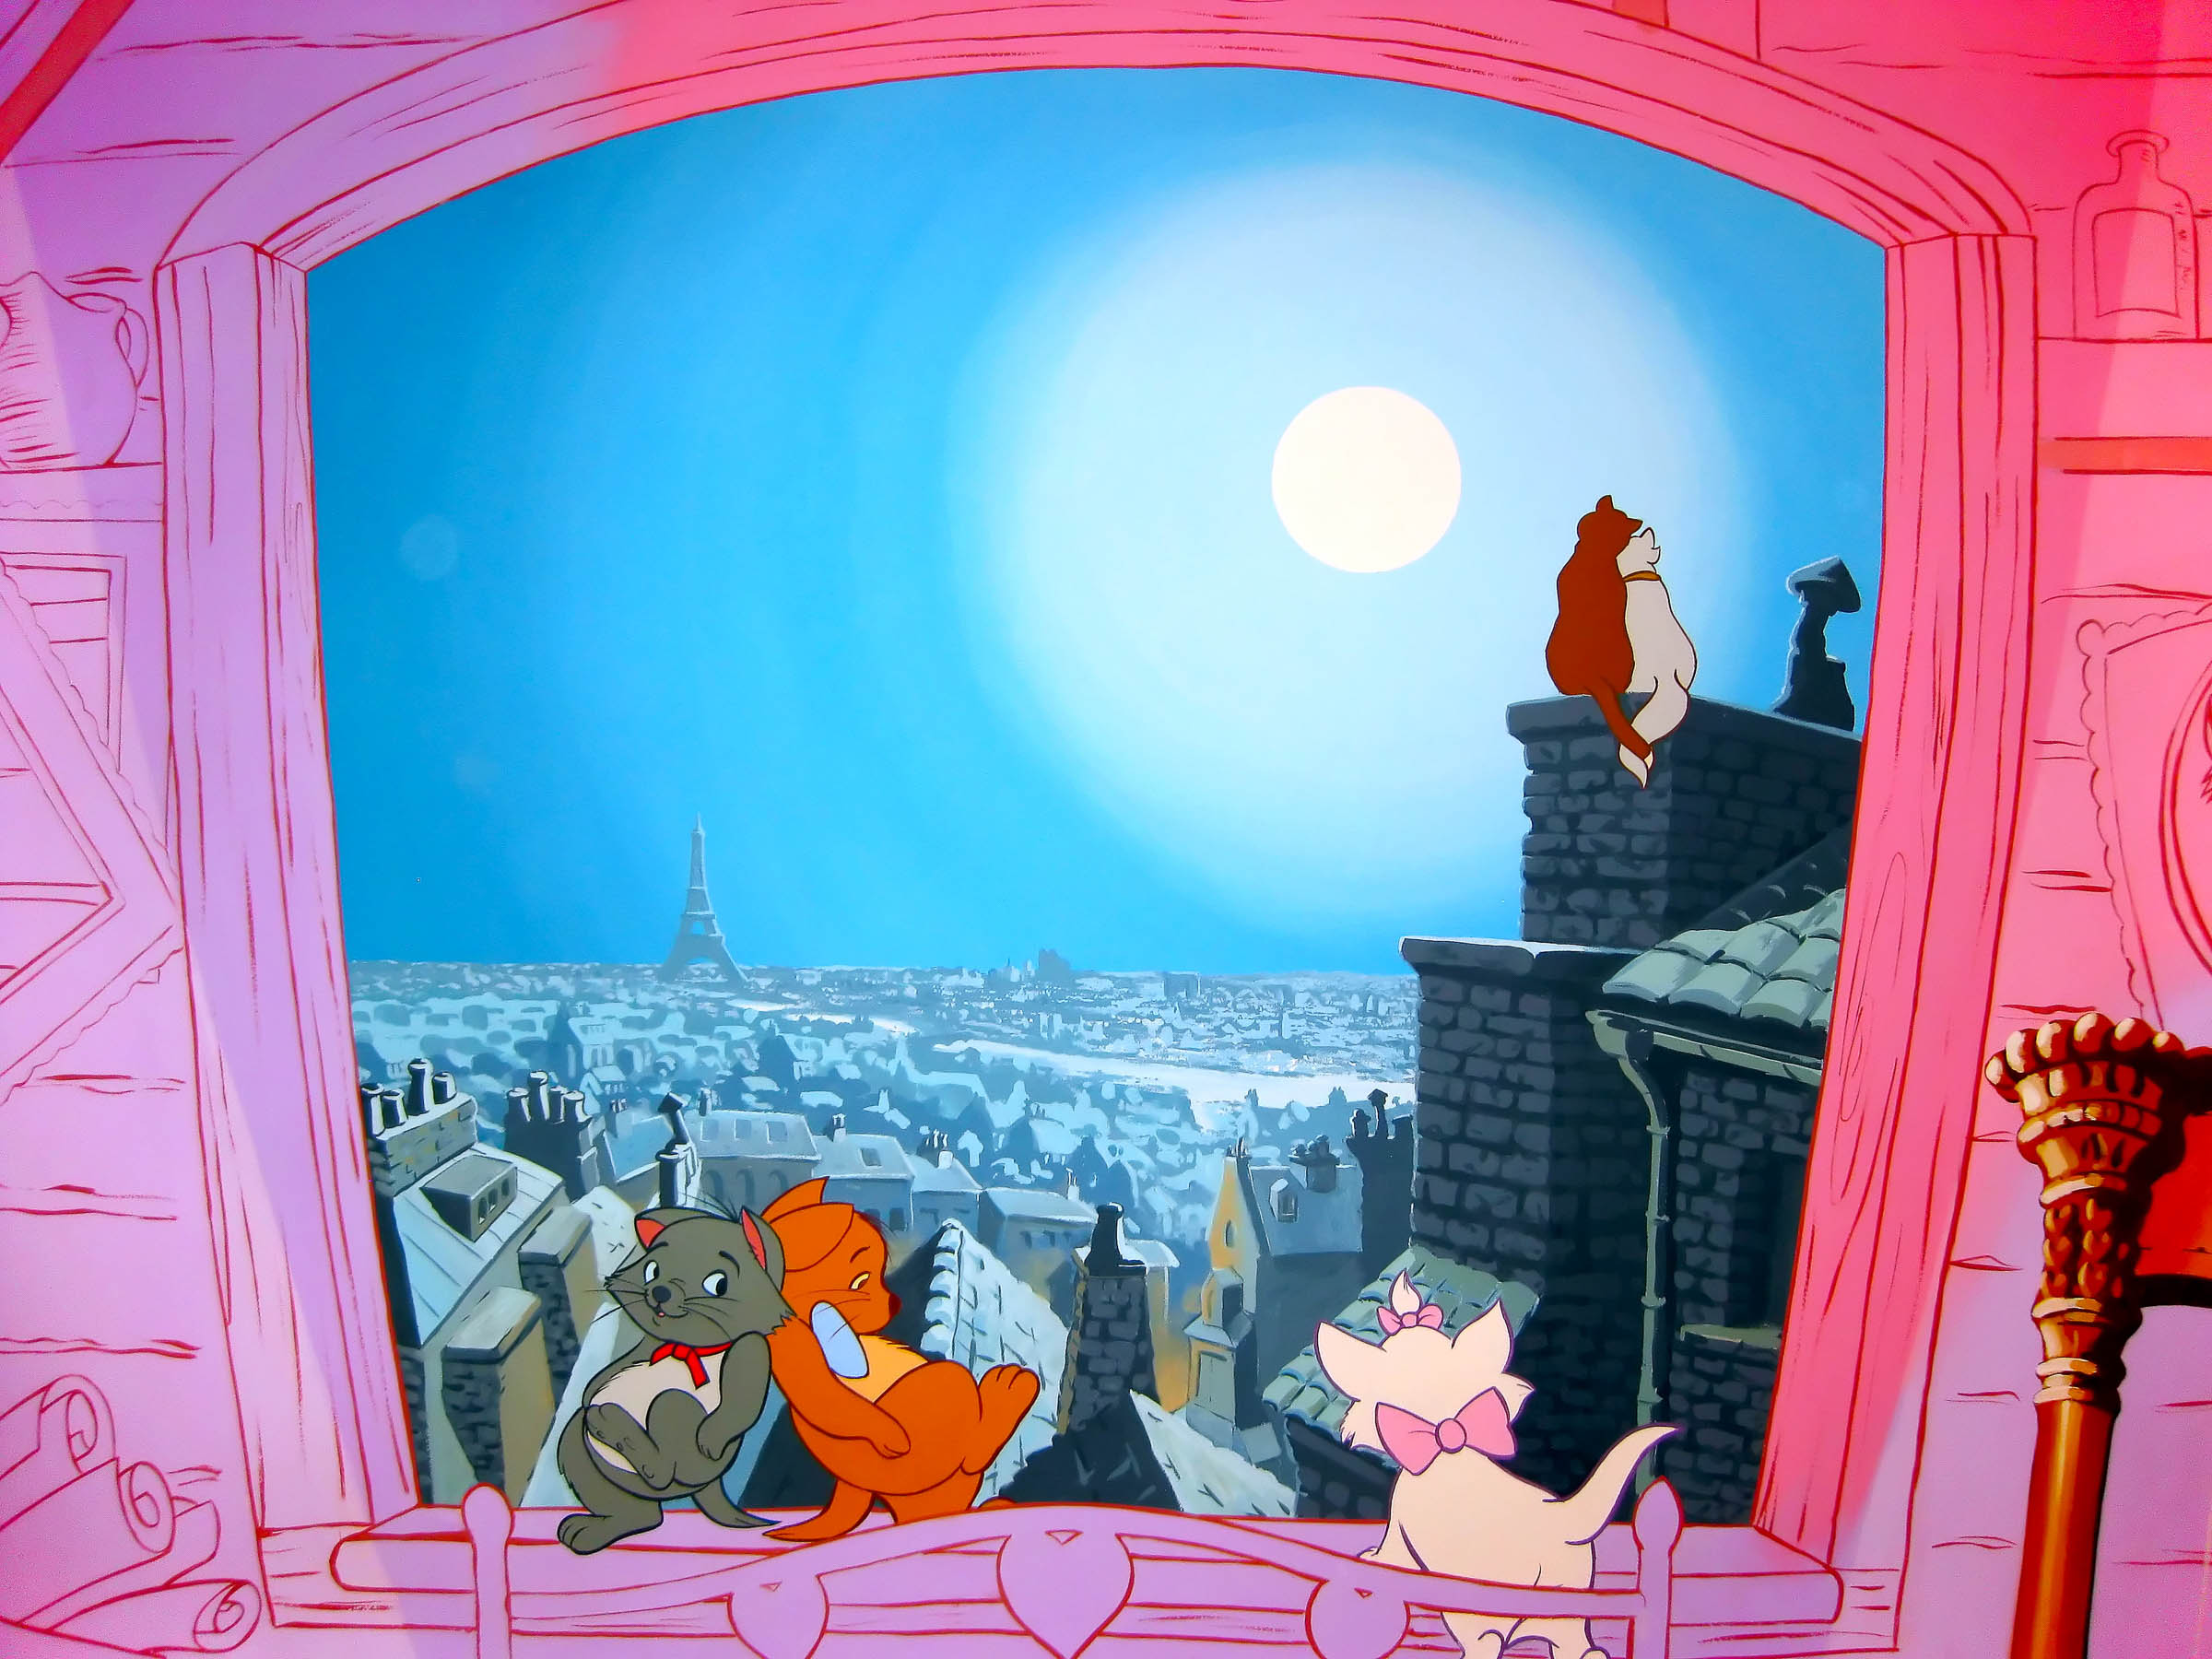 When the Aristocats reach Paris, O'Malley bumps into his ol' pal Scat Cat, so time for some Disney style jazz...